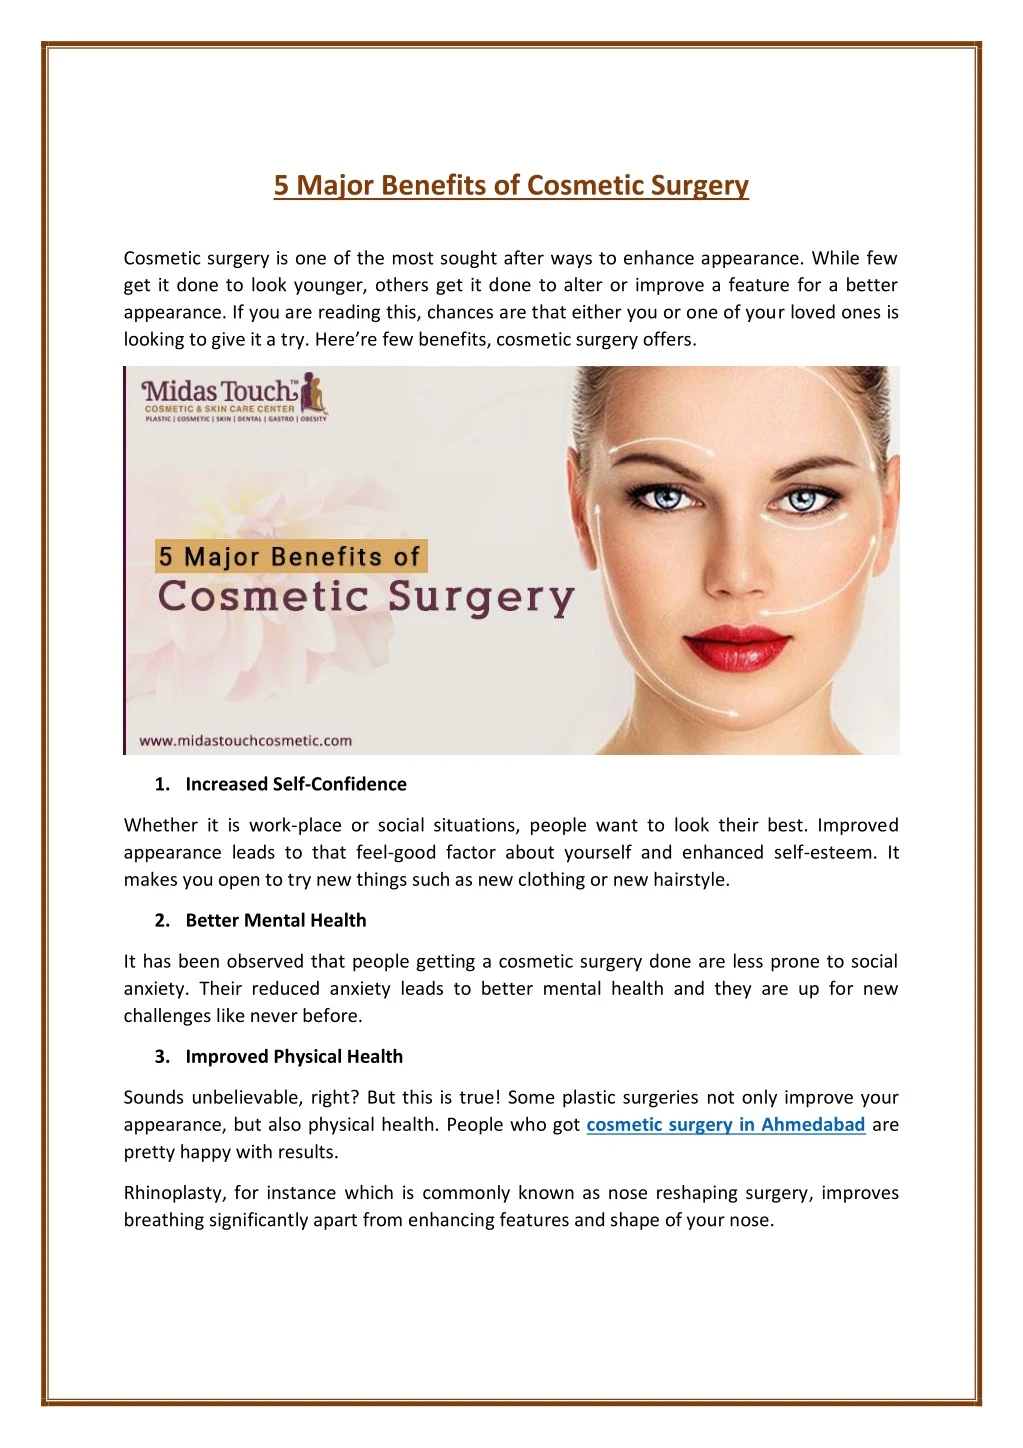 5 major benefits of cosmetic surgery